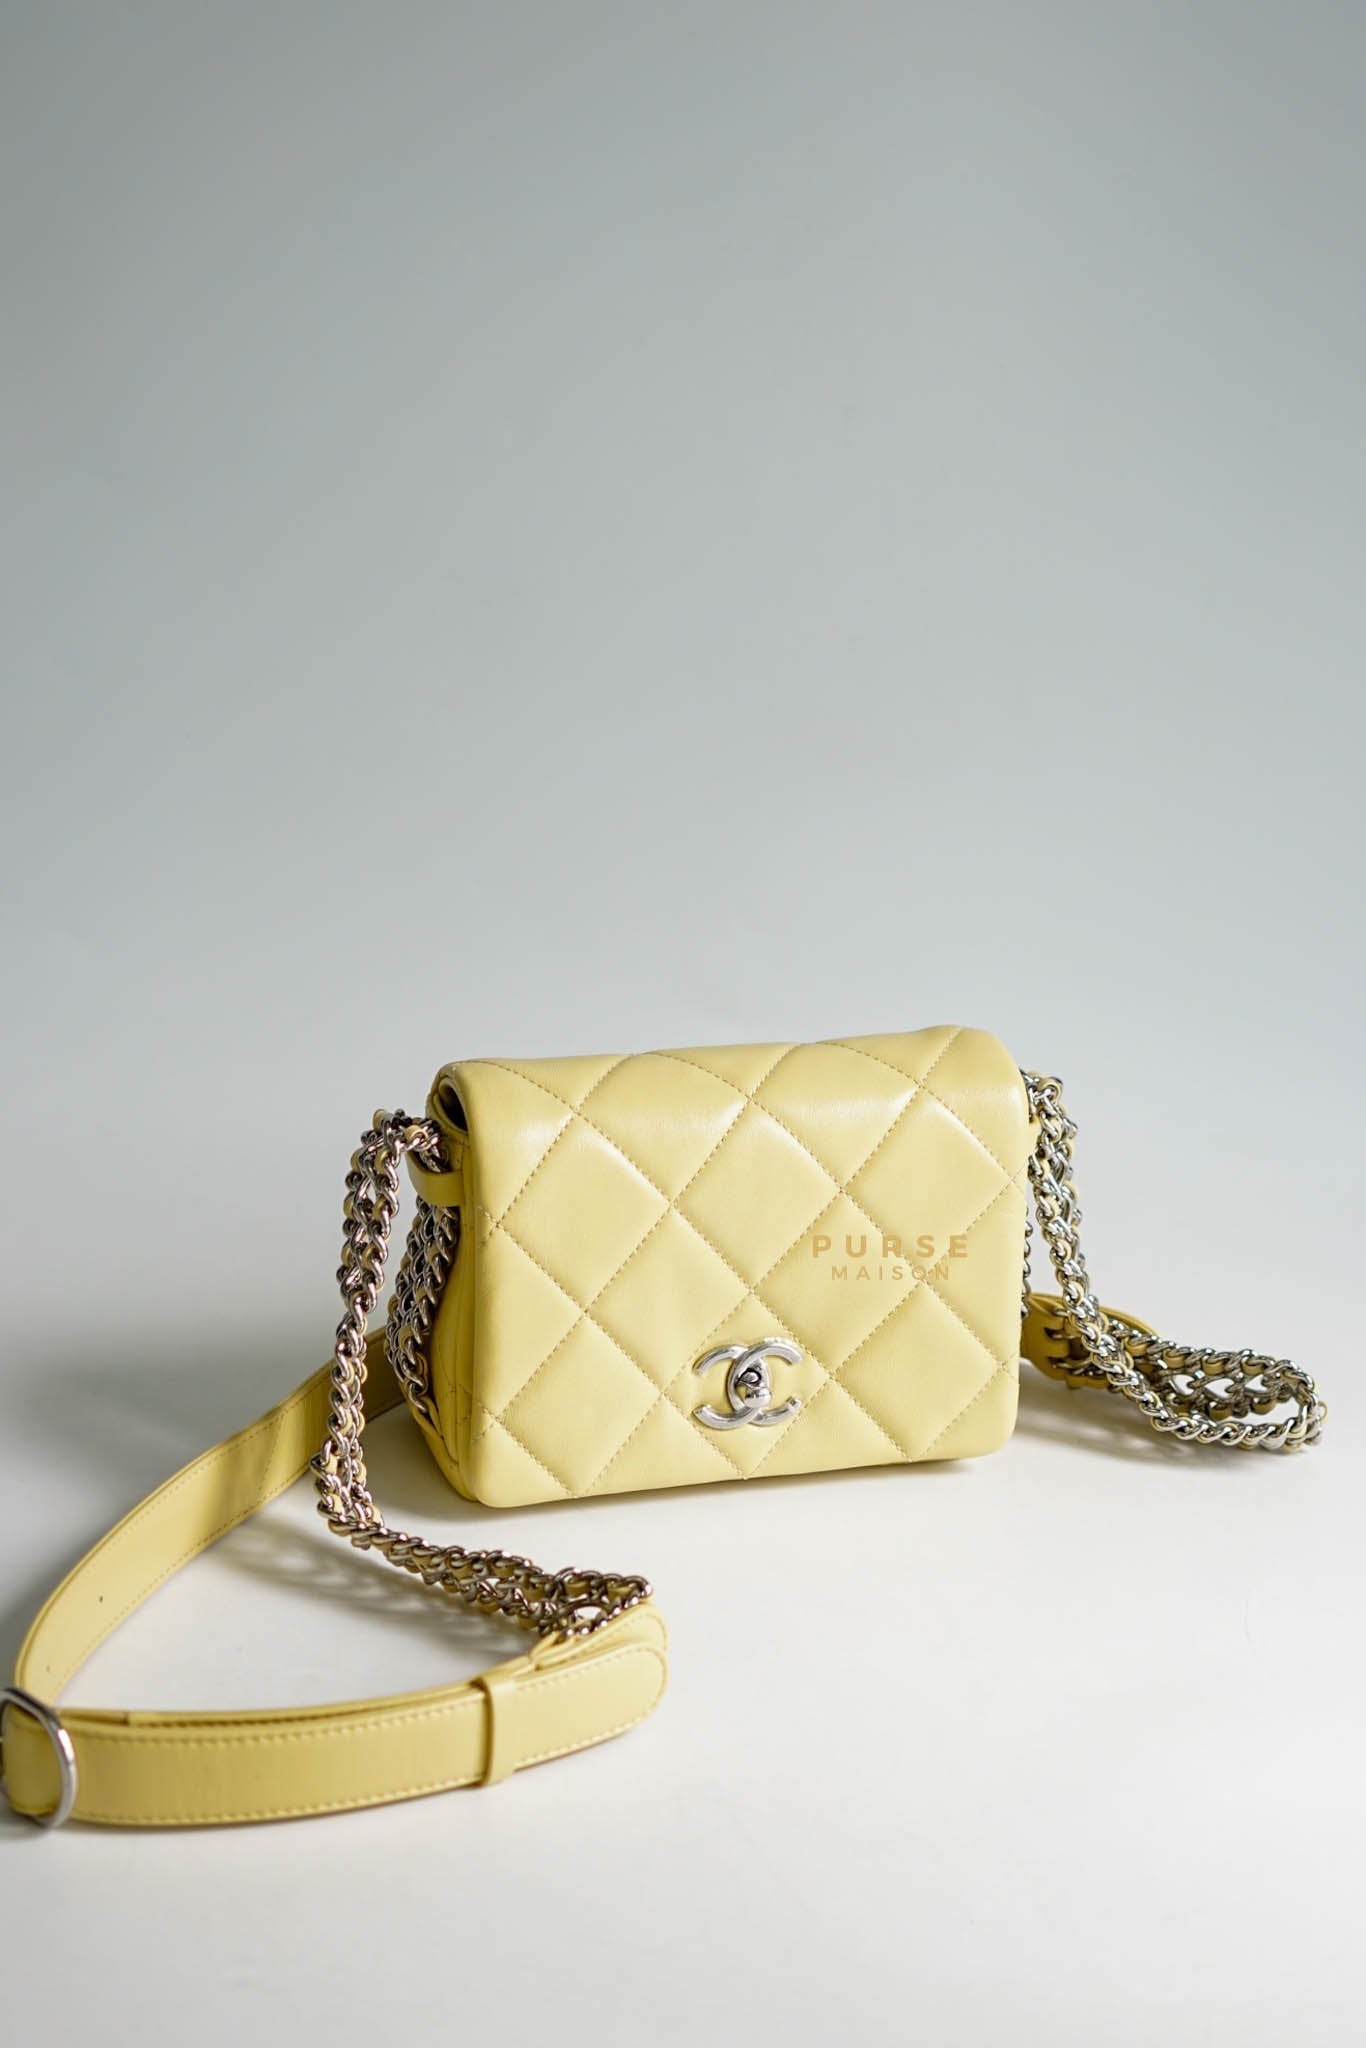 Chanel CC Triple Chain Full Flap Bag in Yellow Quilted Lambskin and Silver Hardware (Microchip) | Purse Maison Luxury Bags Shop